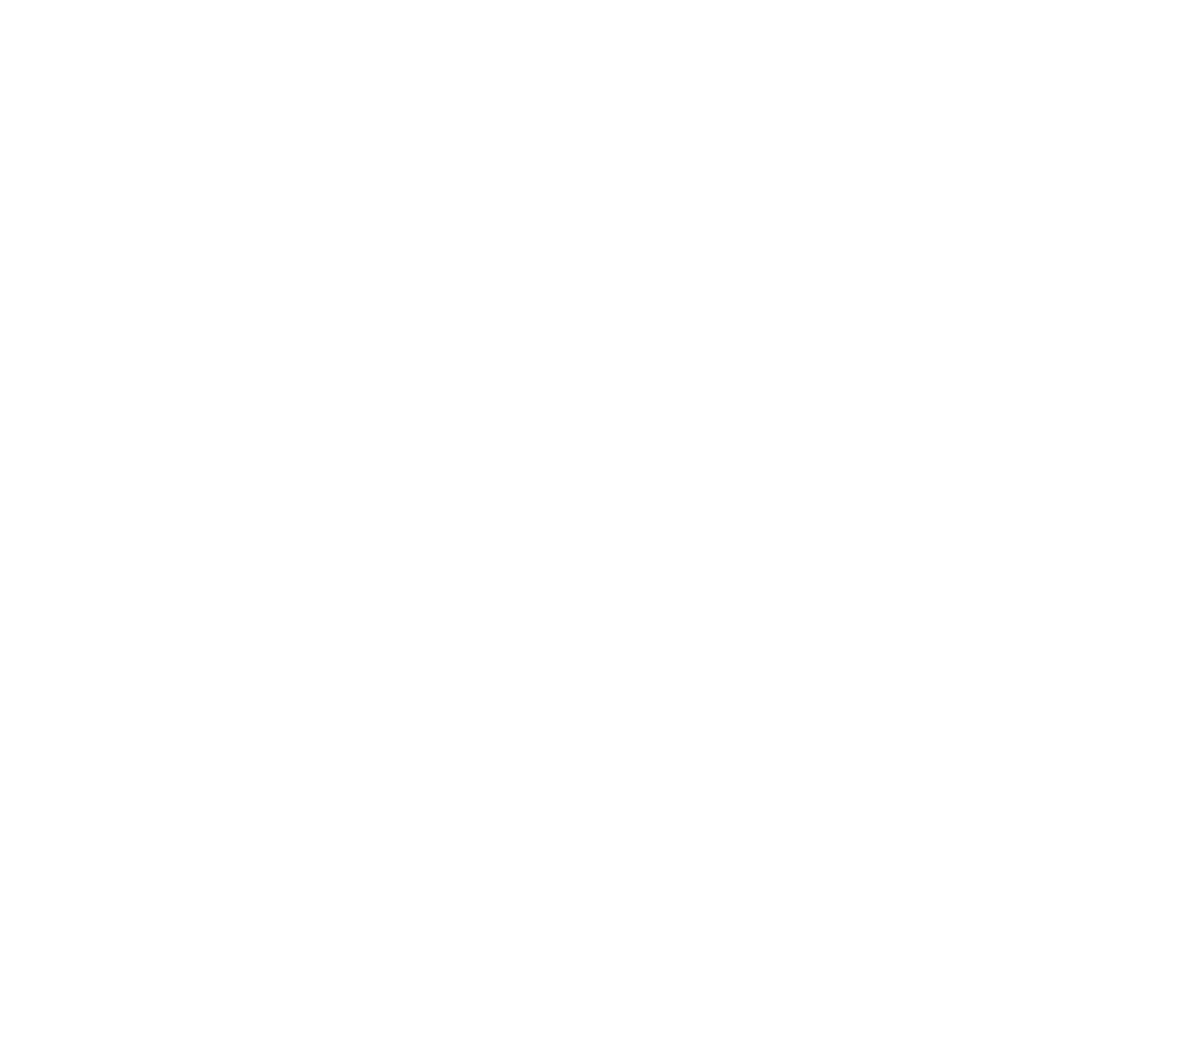 HORS-NORMES EVENT